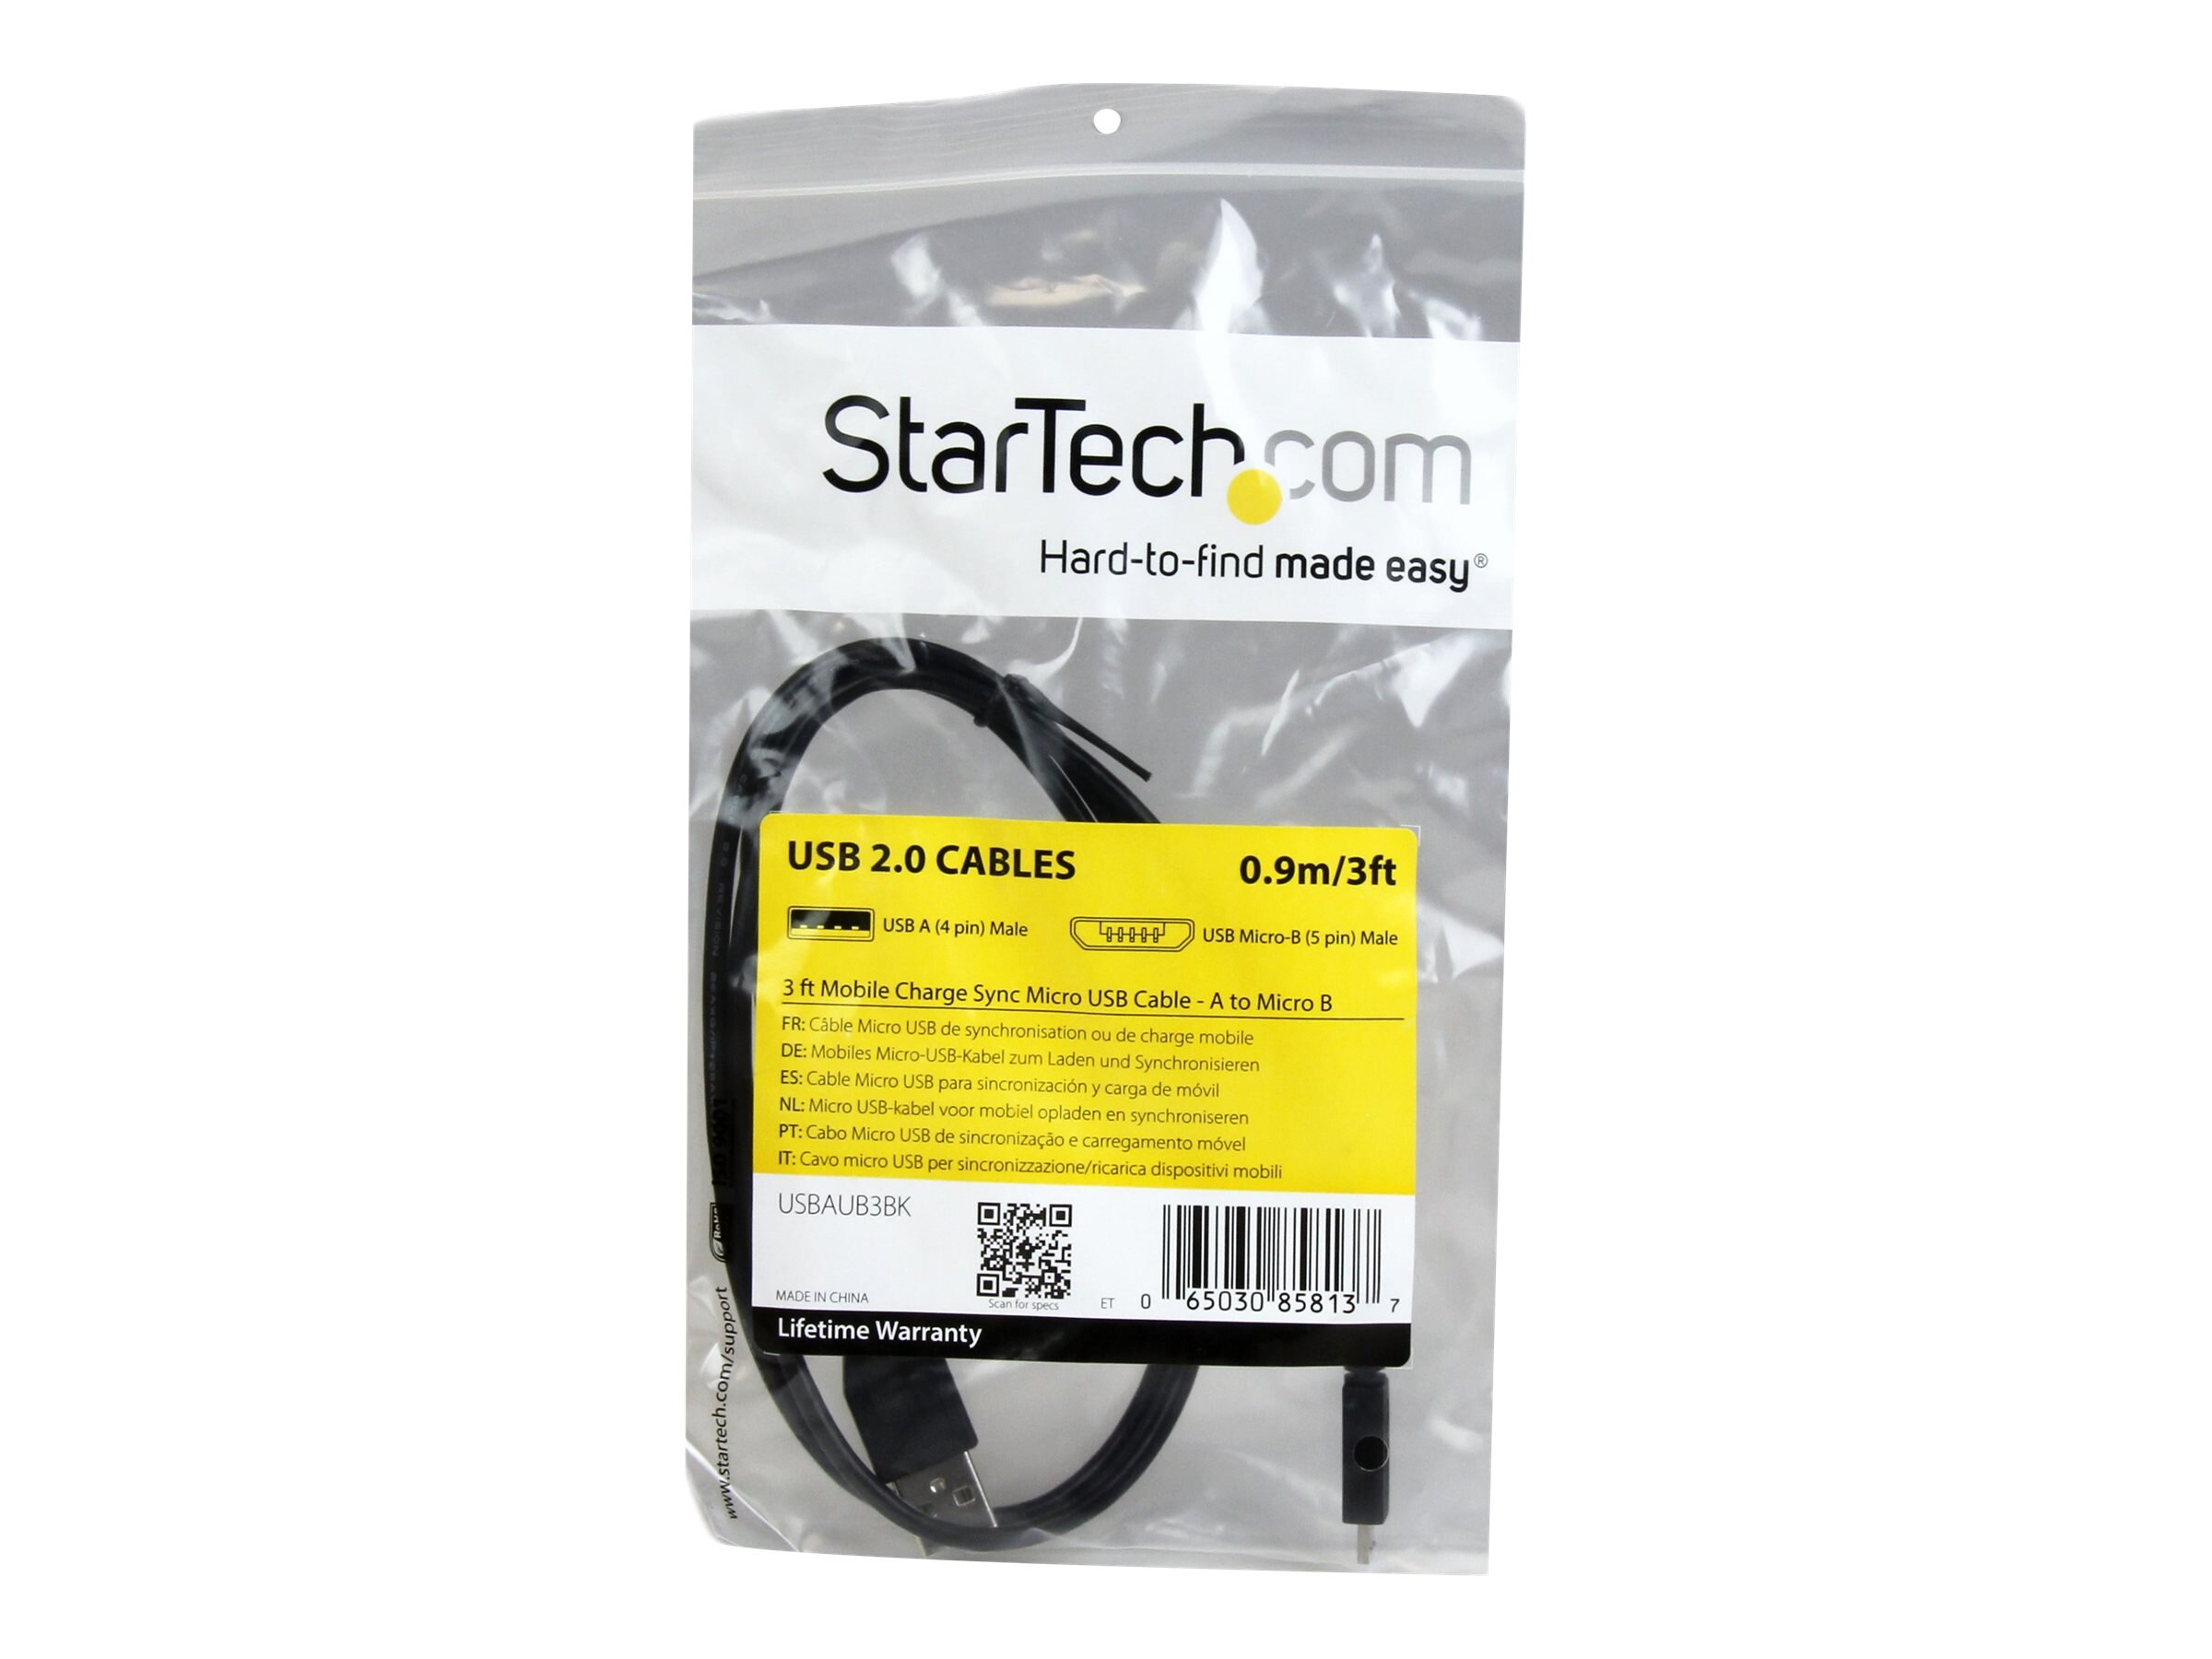 3ft (0.9m) USB 2.0 A to Micro-B Cable M/M - Black (0.9m)